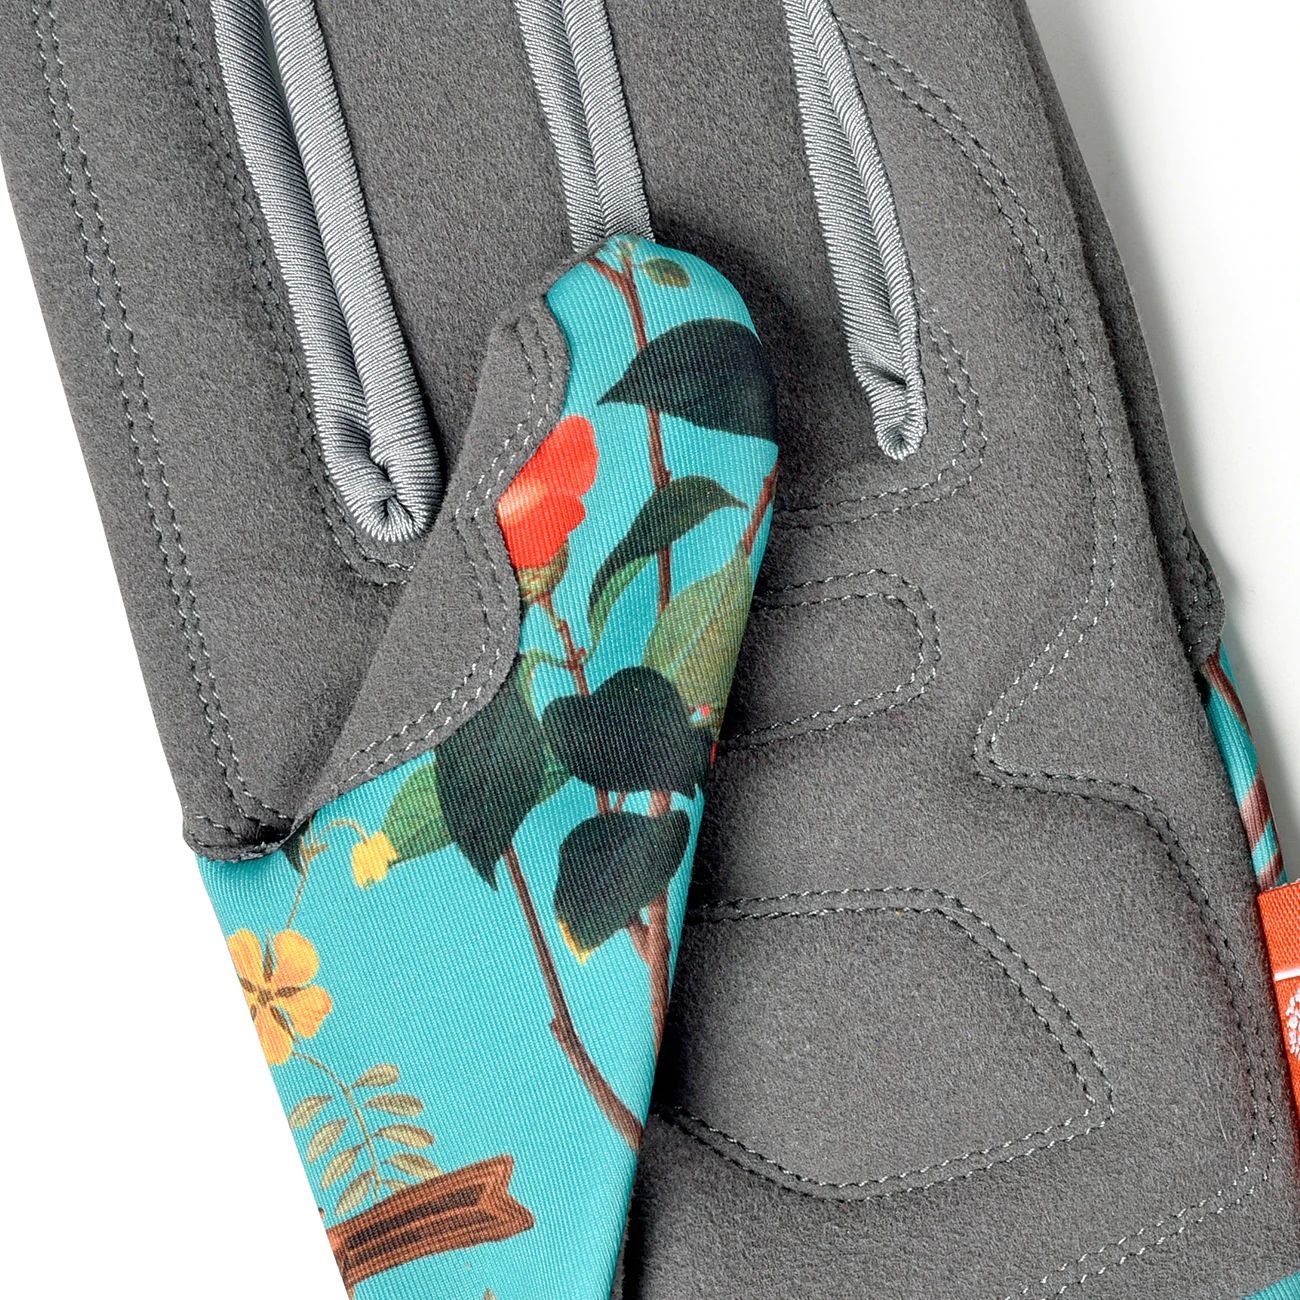 These gardening gloves feature a cushioned palm for comfort and protection.